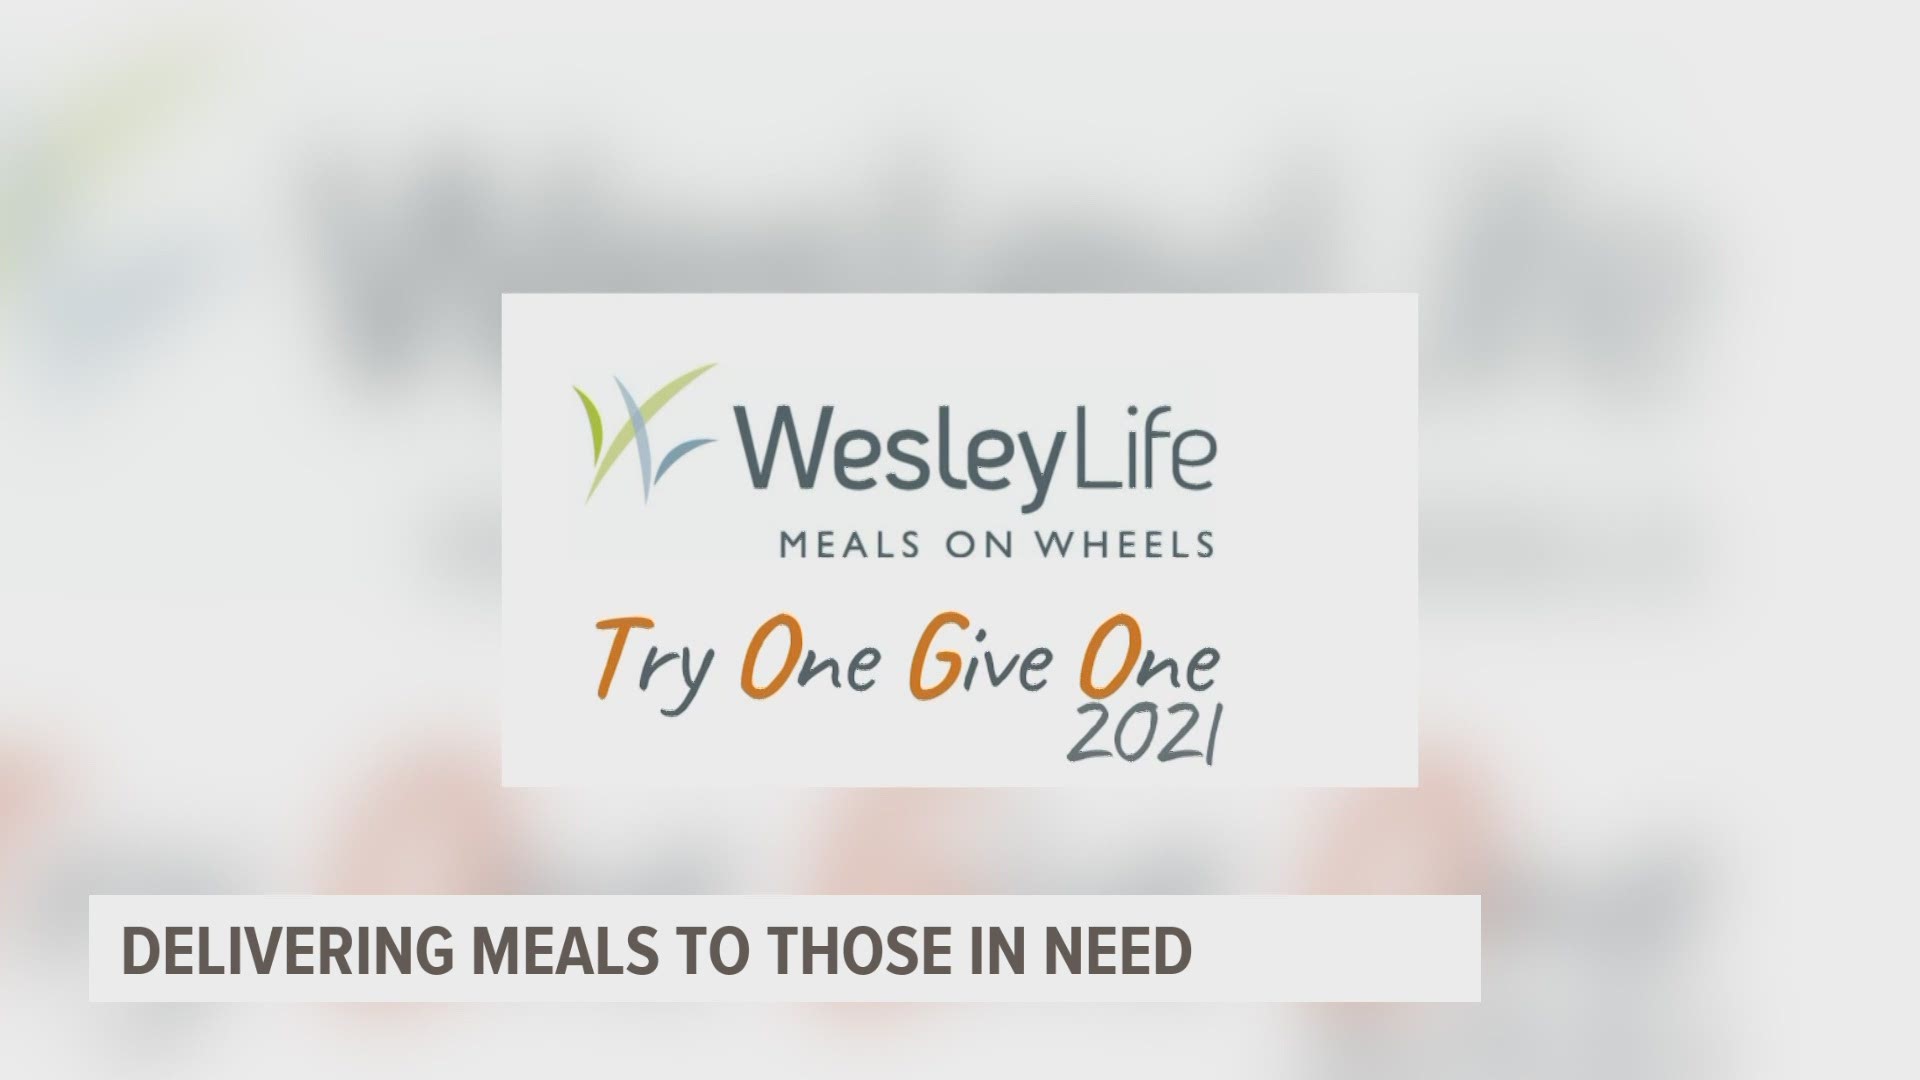 The fundraiser Try One Give One starts May 17-May 21. There are three meal options to choose from and each is 20 dollars.